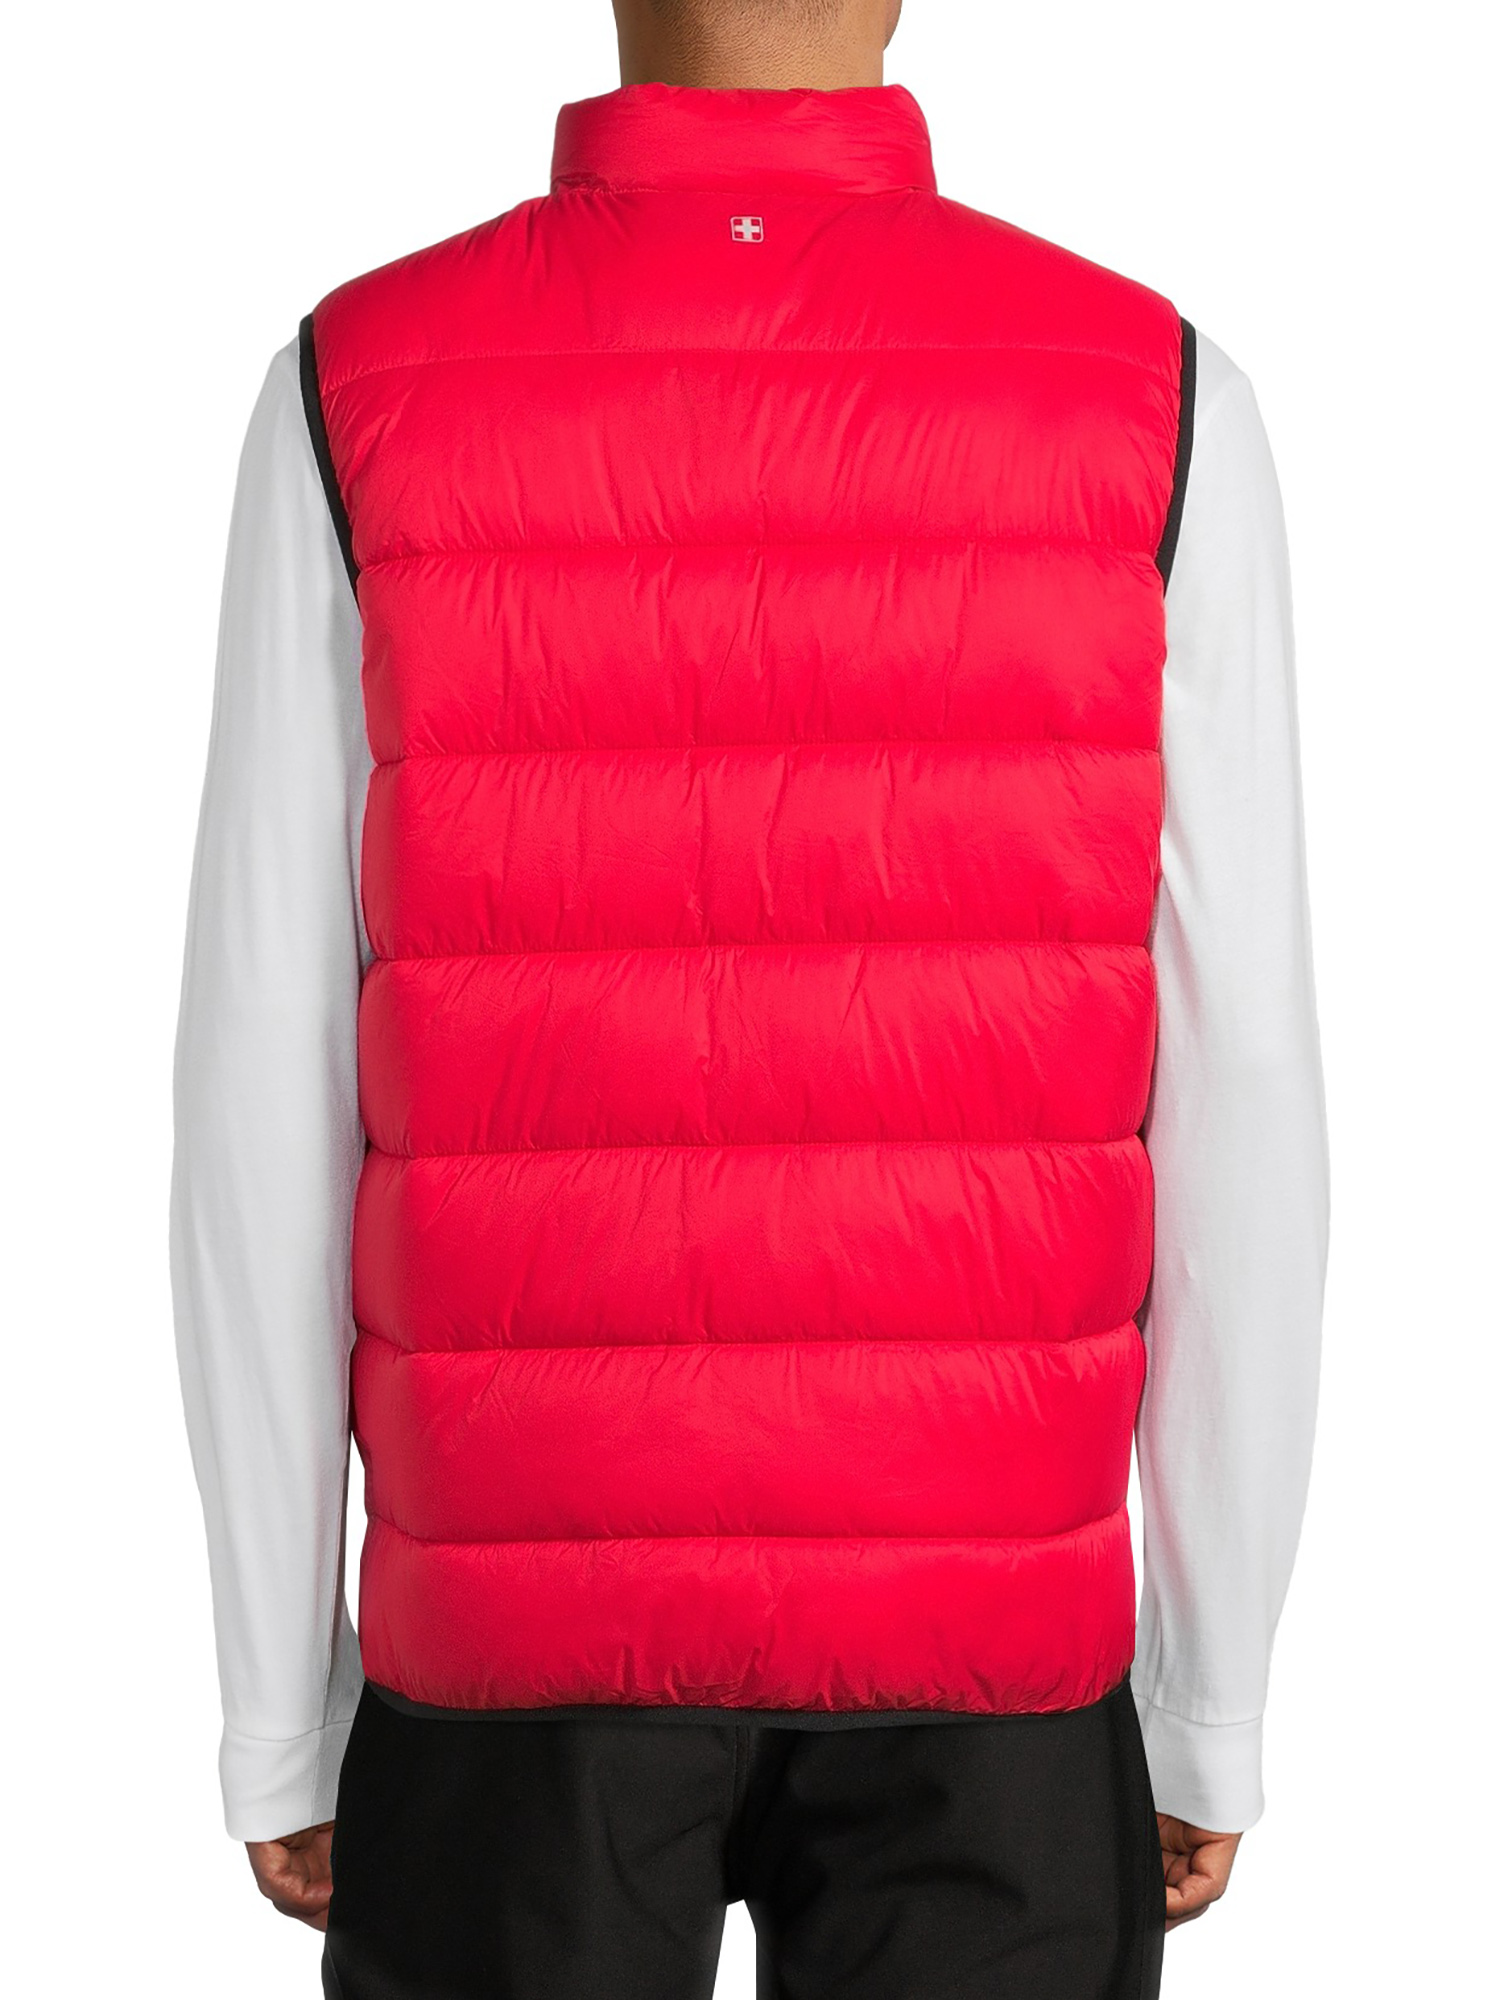 Swiss Tech Men's Reversible Puffer Vest, Up to Size 3XL - image 2 of 5